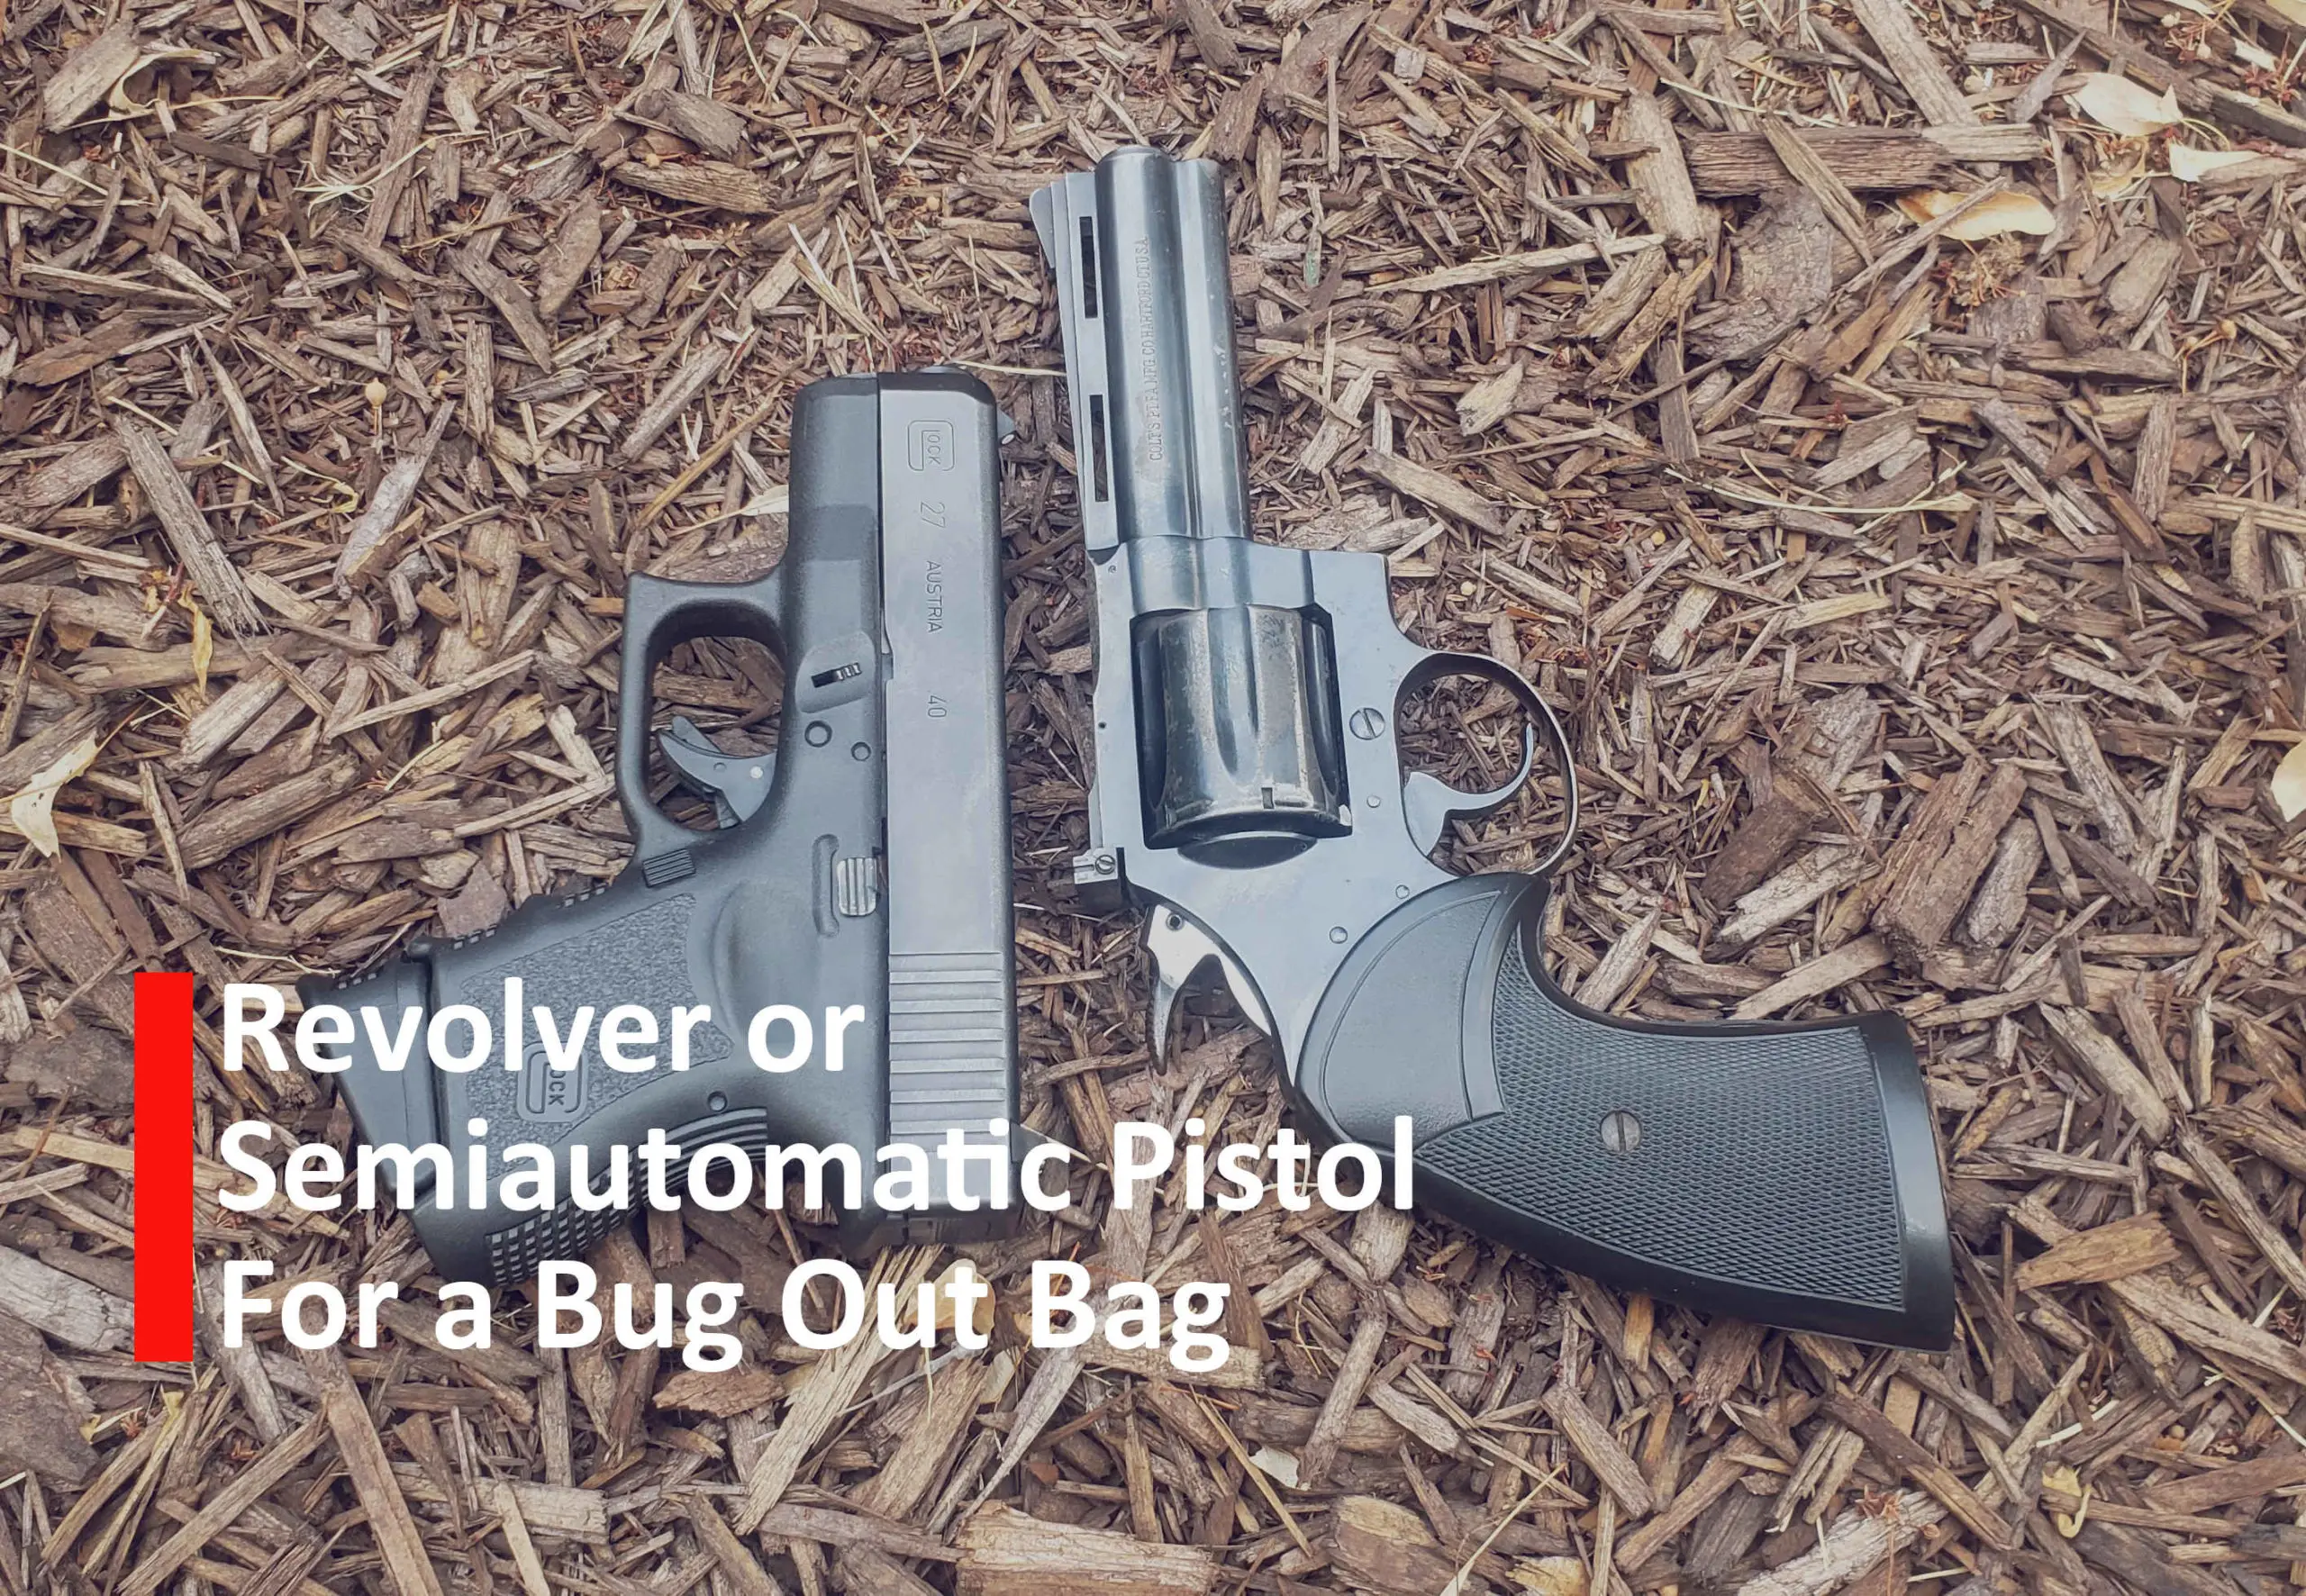 Revolver or Semiautomatic Pistol for a Bug Out Bag